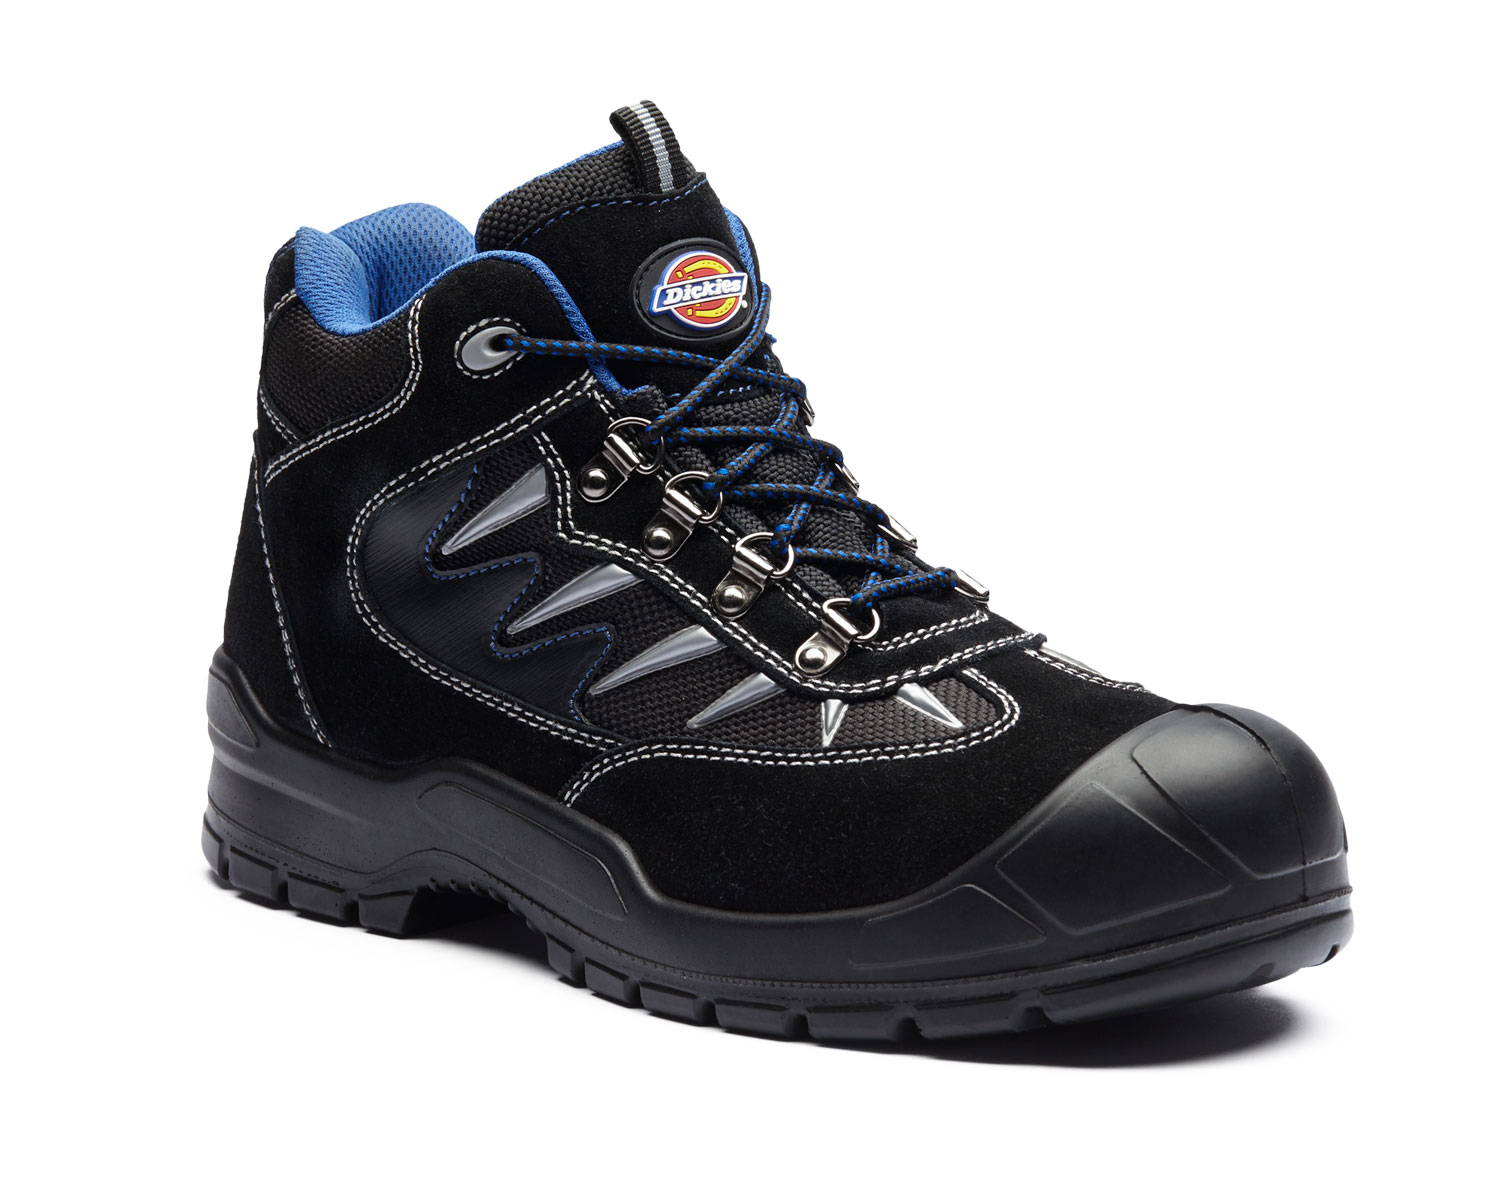 Dickies Storm II Safety Boot